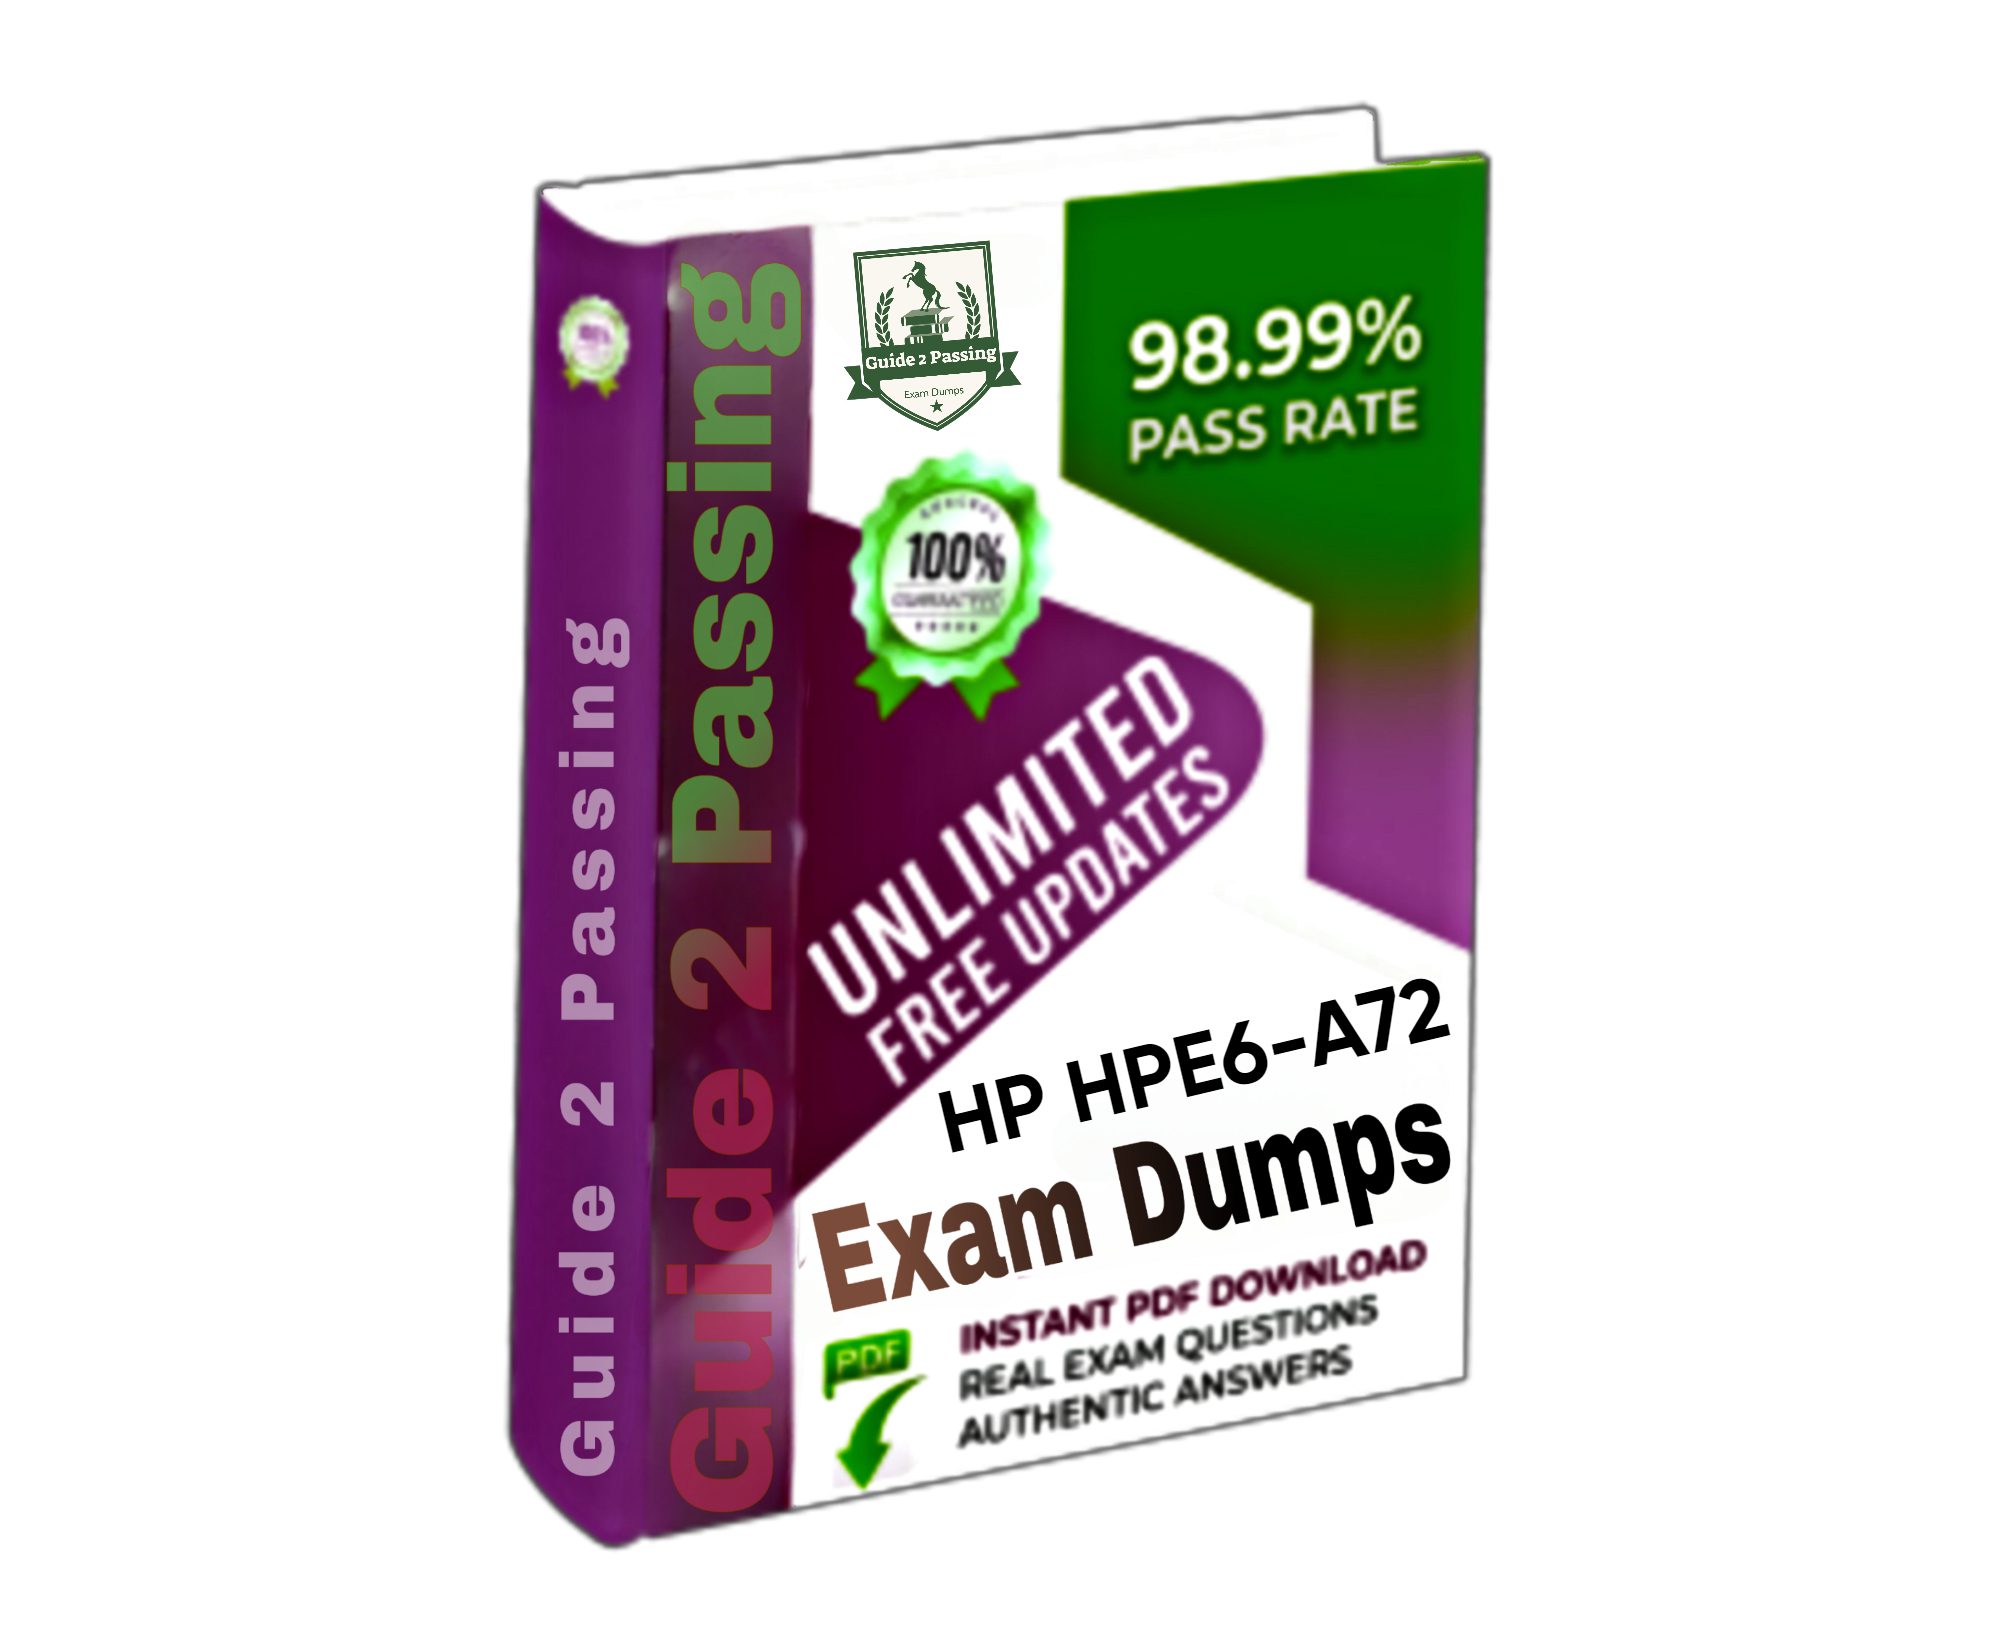 Pass Your HP HPE6-A72 Exam Dumps From Guide 2 Passing